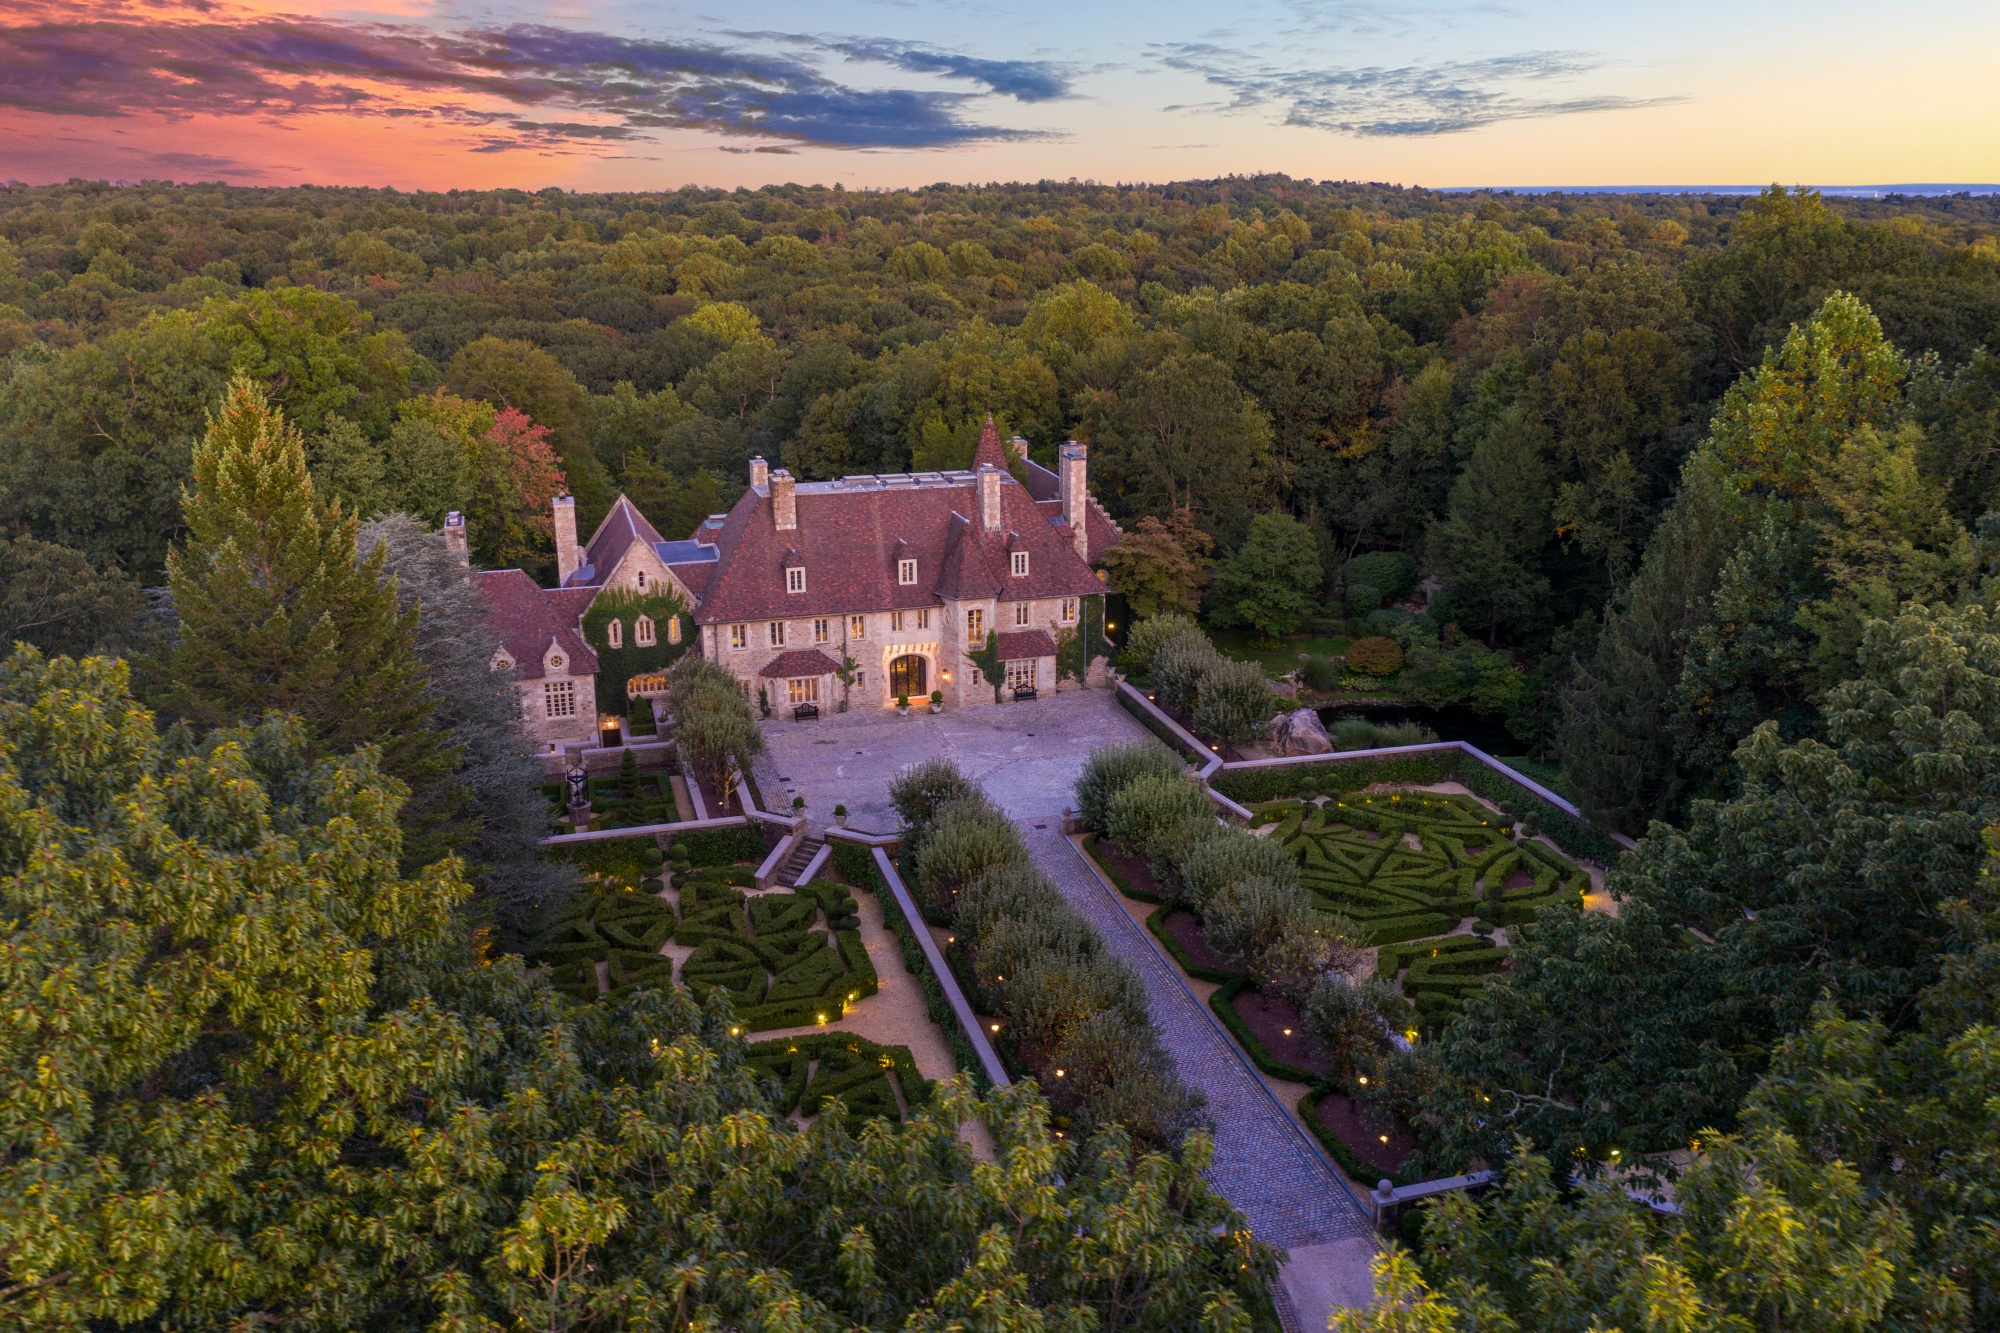 Greenwich mansion owned by shoe mogul Vince Camuto to sell at auction